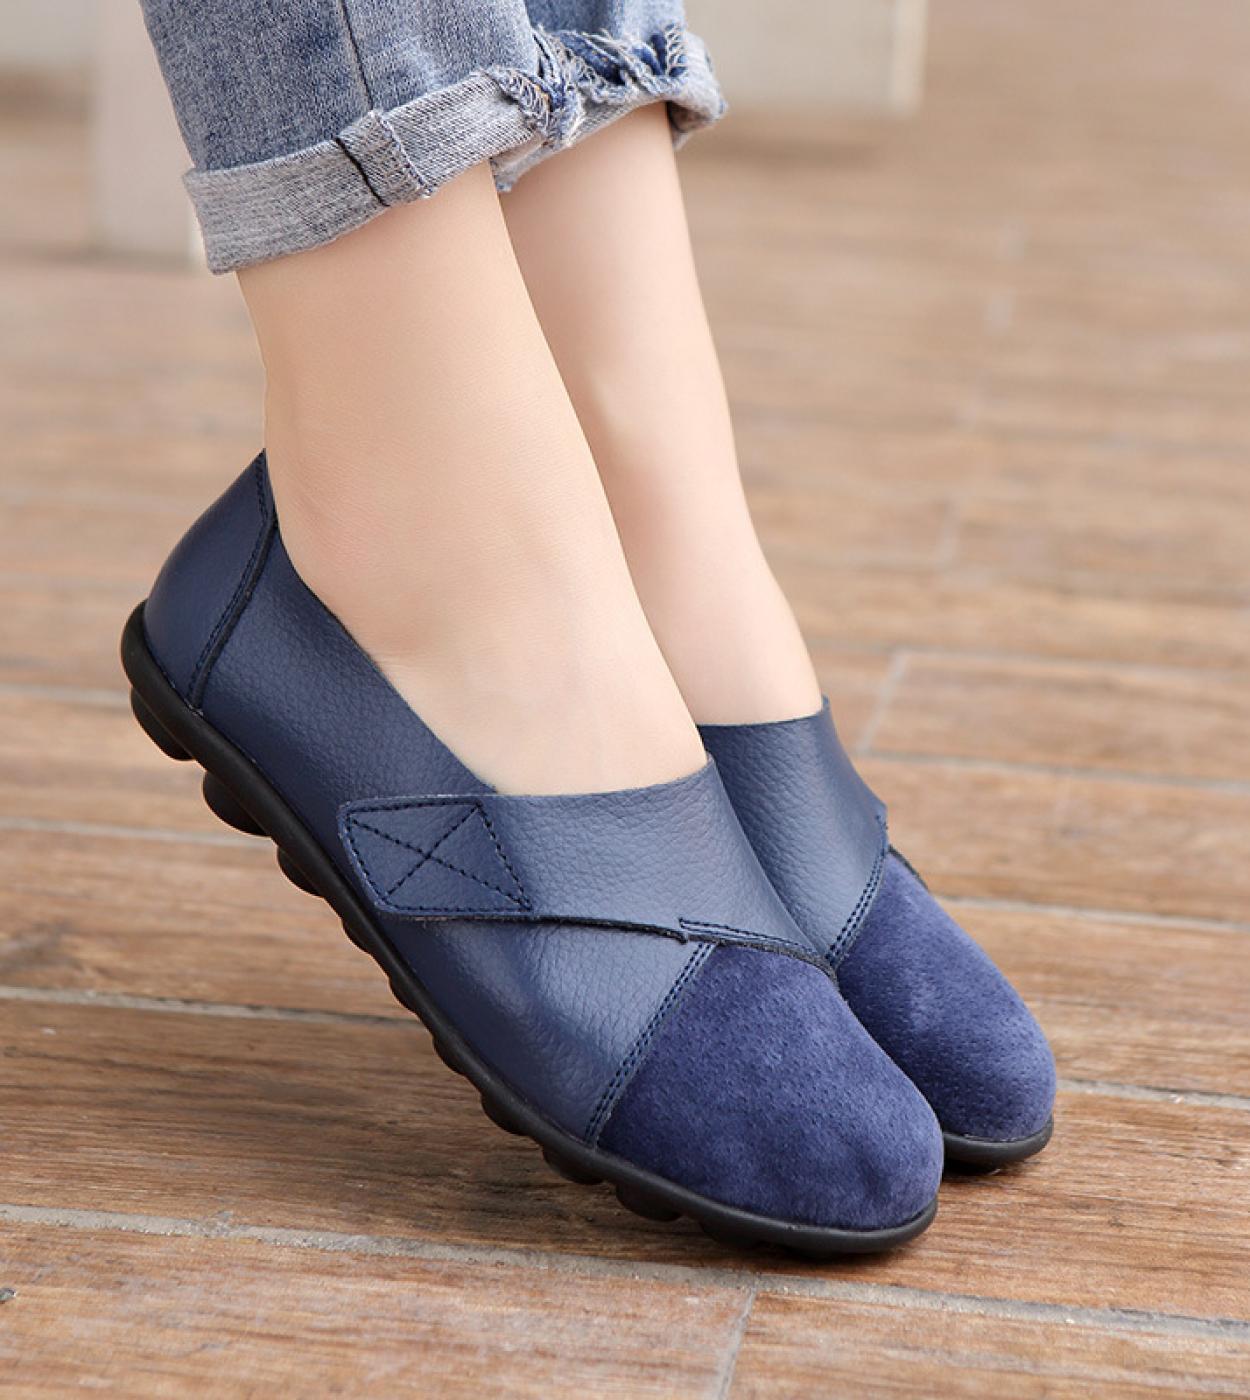 Plus Size Casual Flat Shoes Women Retro Slip On Lightweight Comfort Sneakers Fashion Soft Sole Loafer Female Moccasin Bo